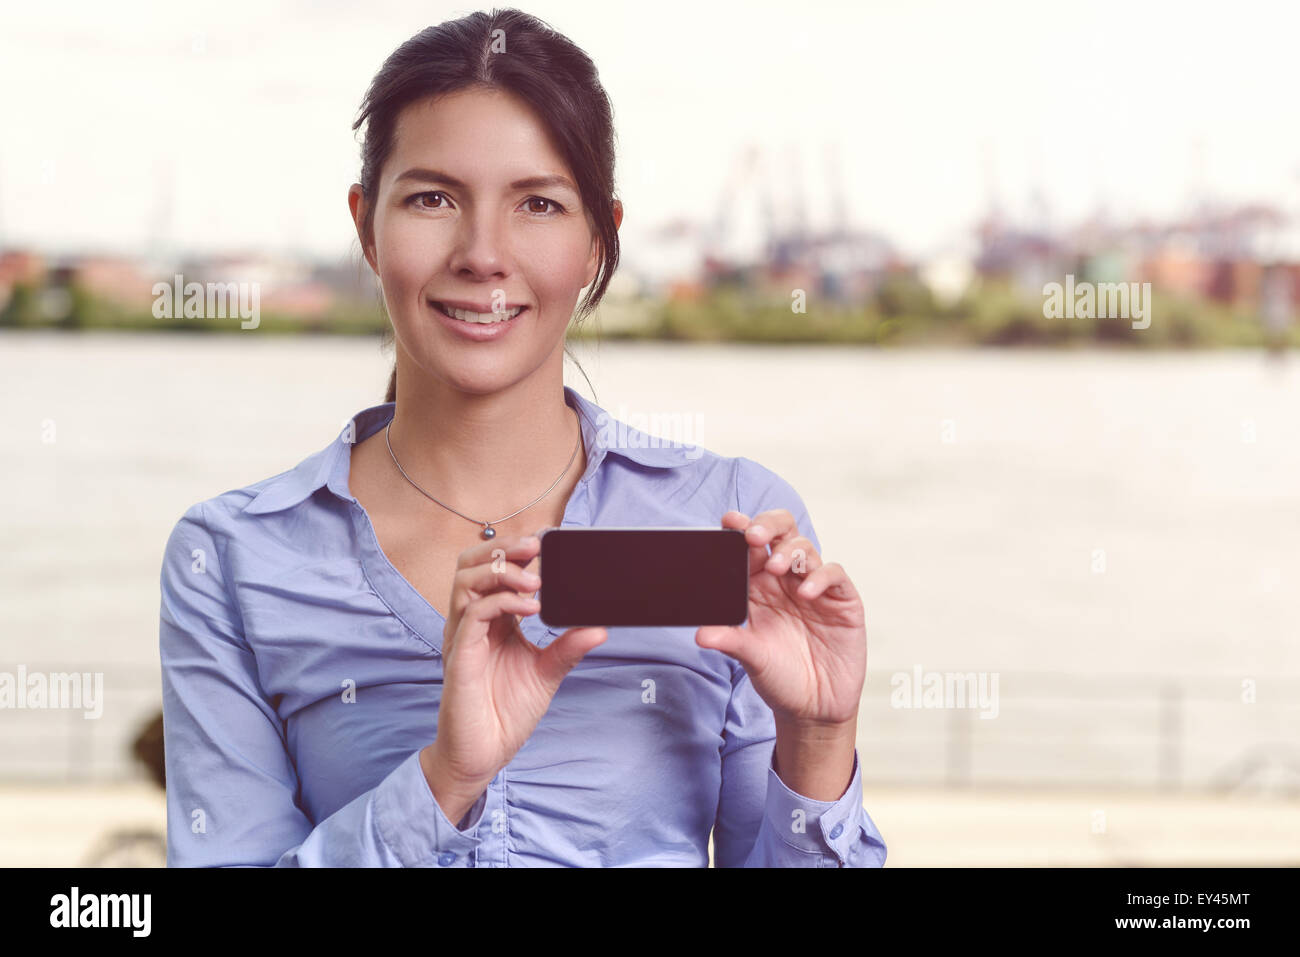 Smiling woman displaying her mobile phone for the camera with the blank screen in the horizontal position, river or waterway bac Stock Photo